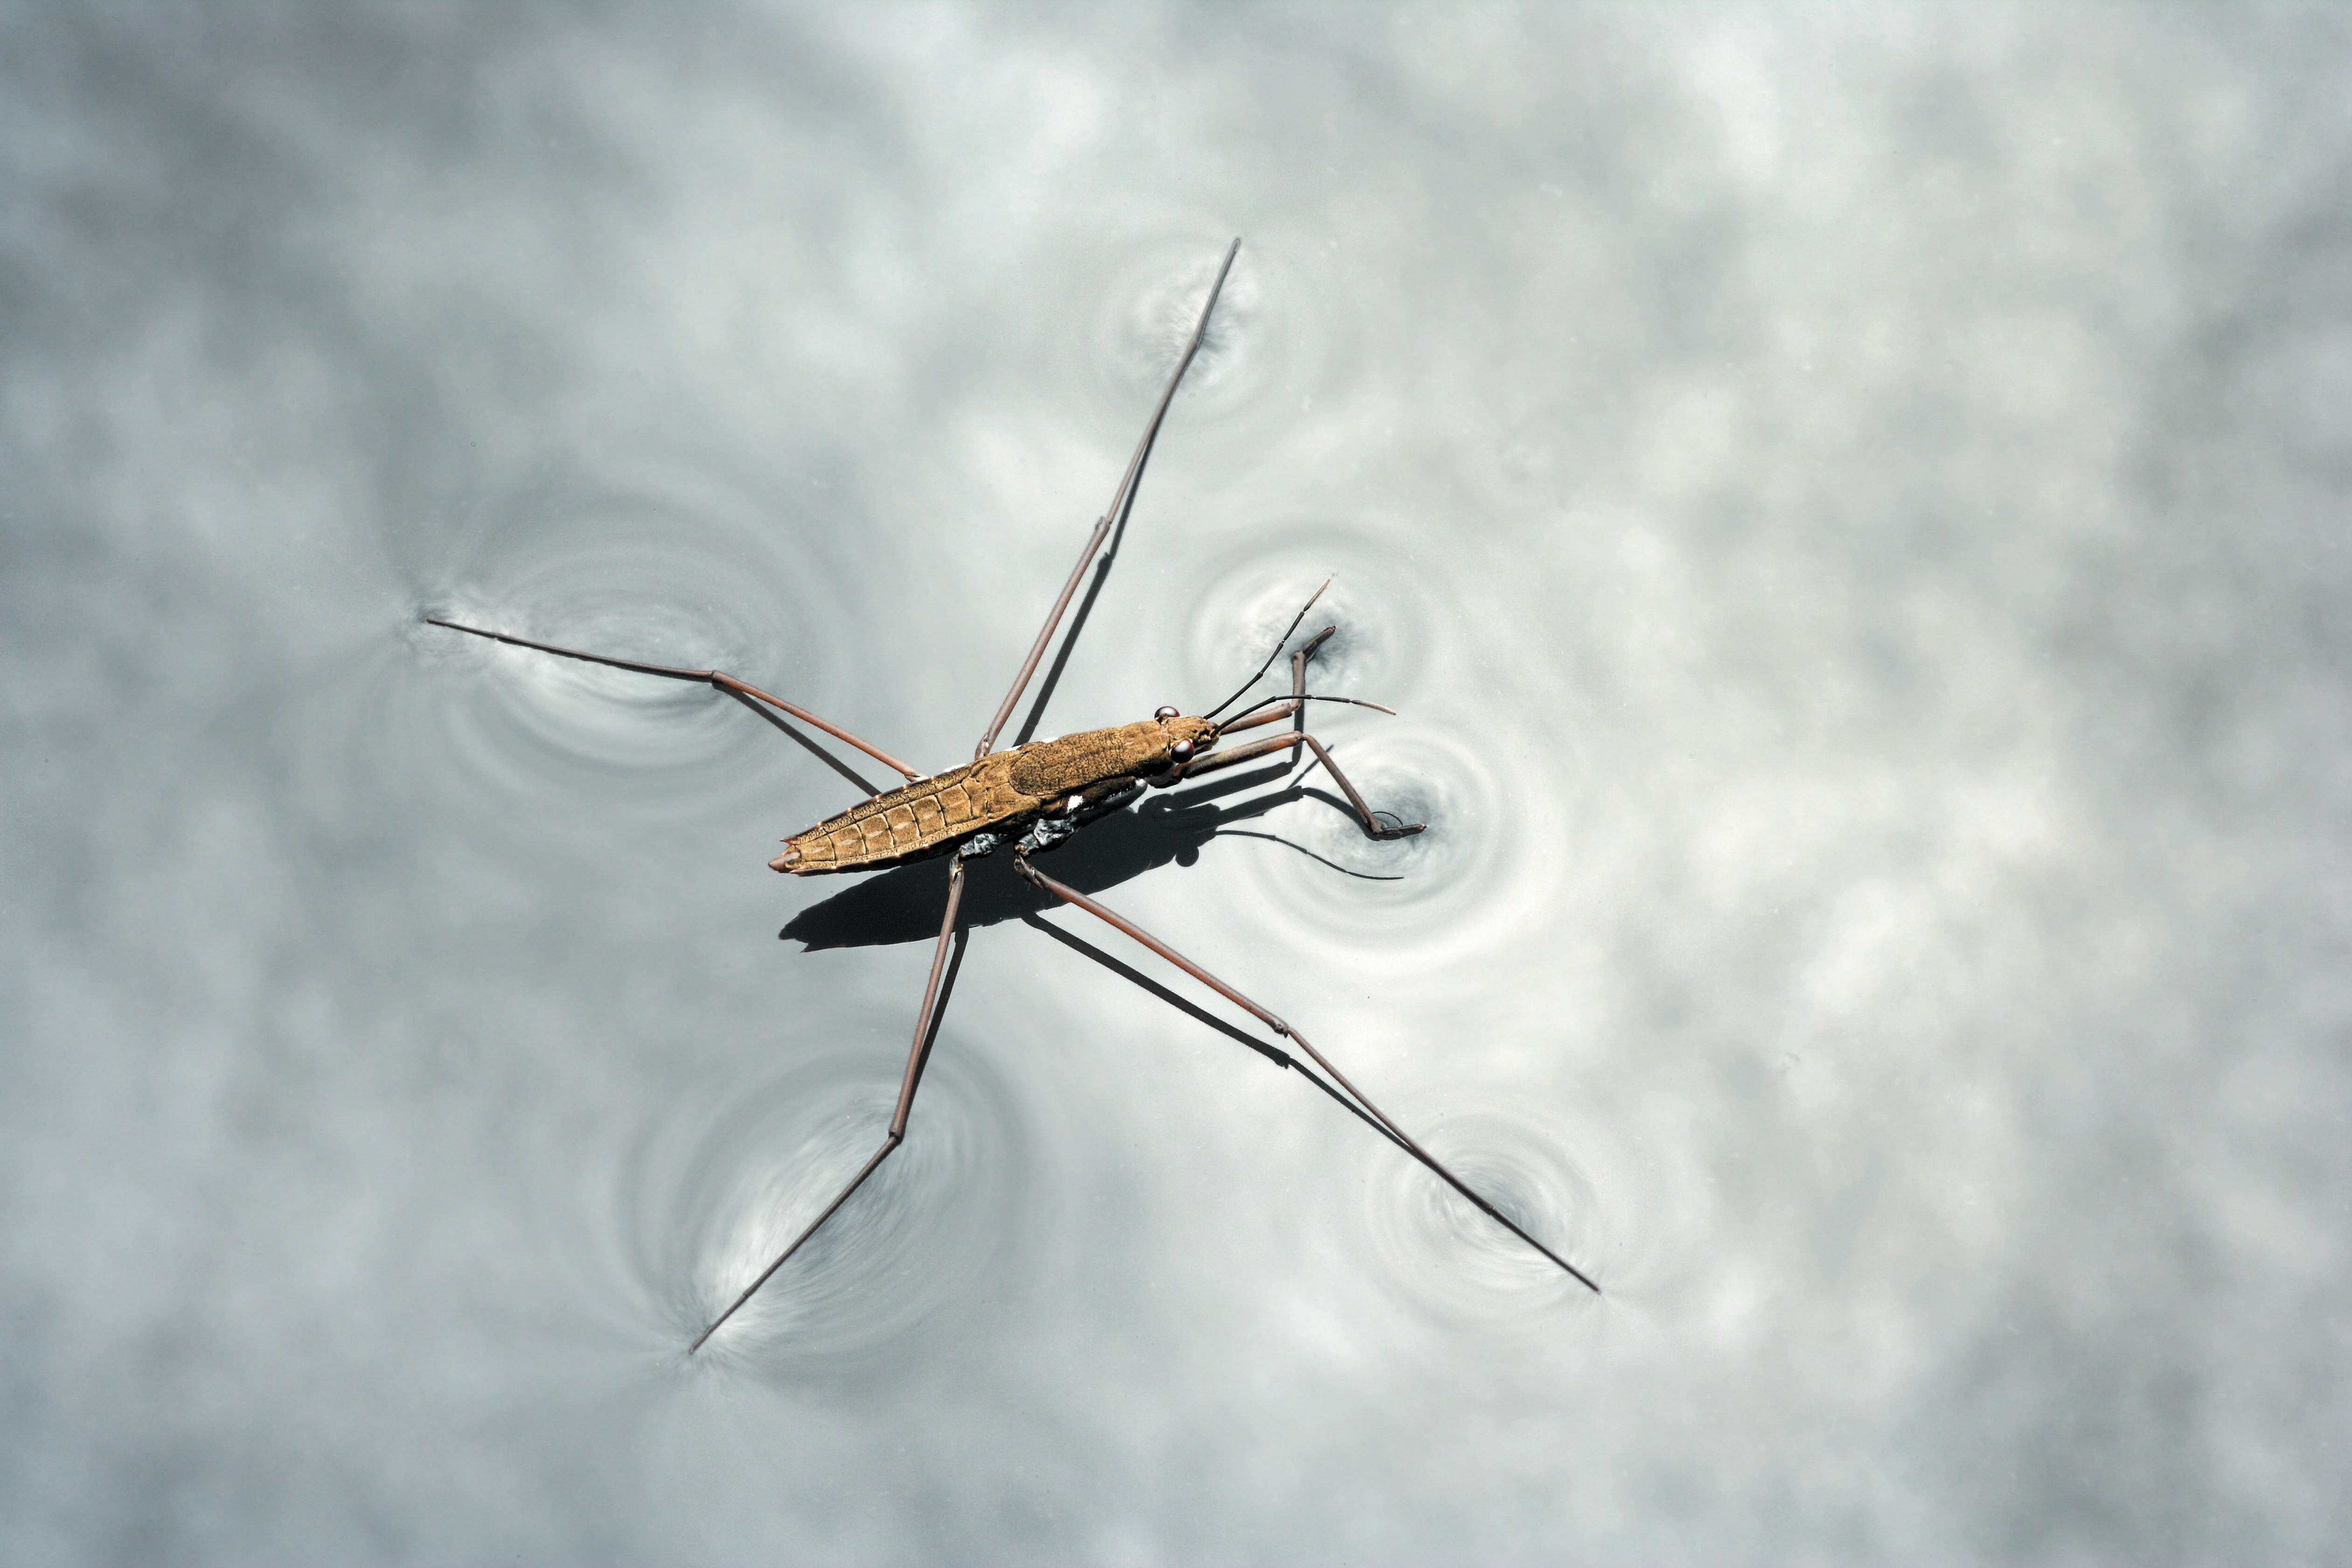 Poems: 'Water Striders' and 'Fallowing'